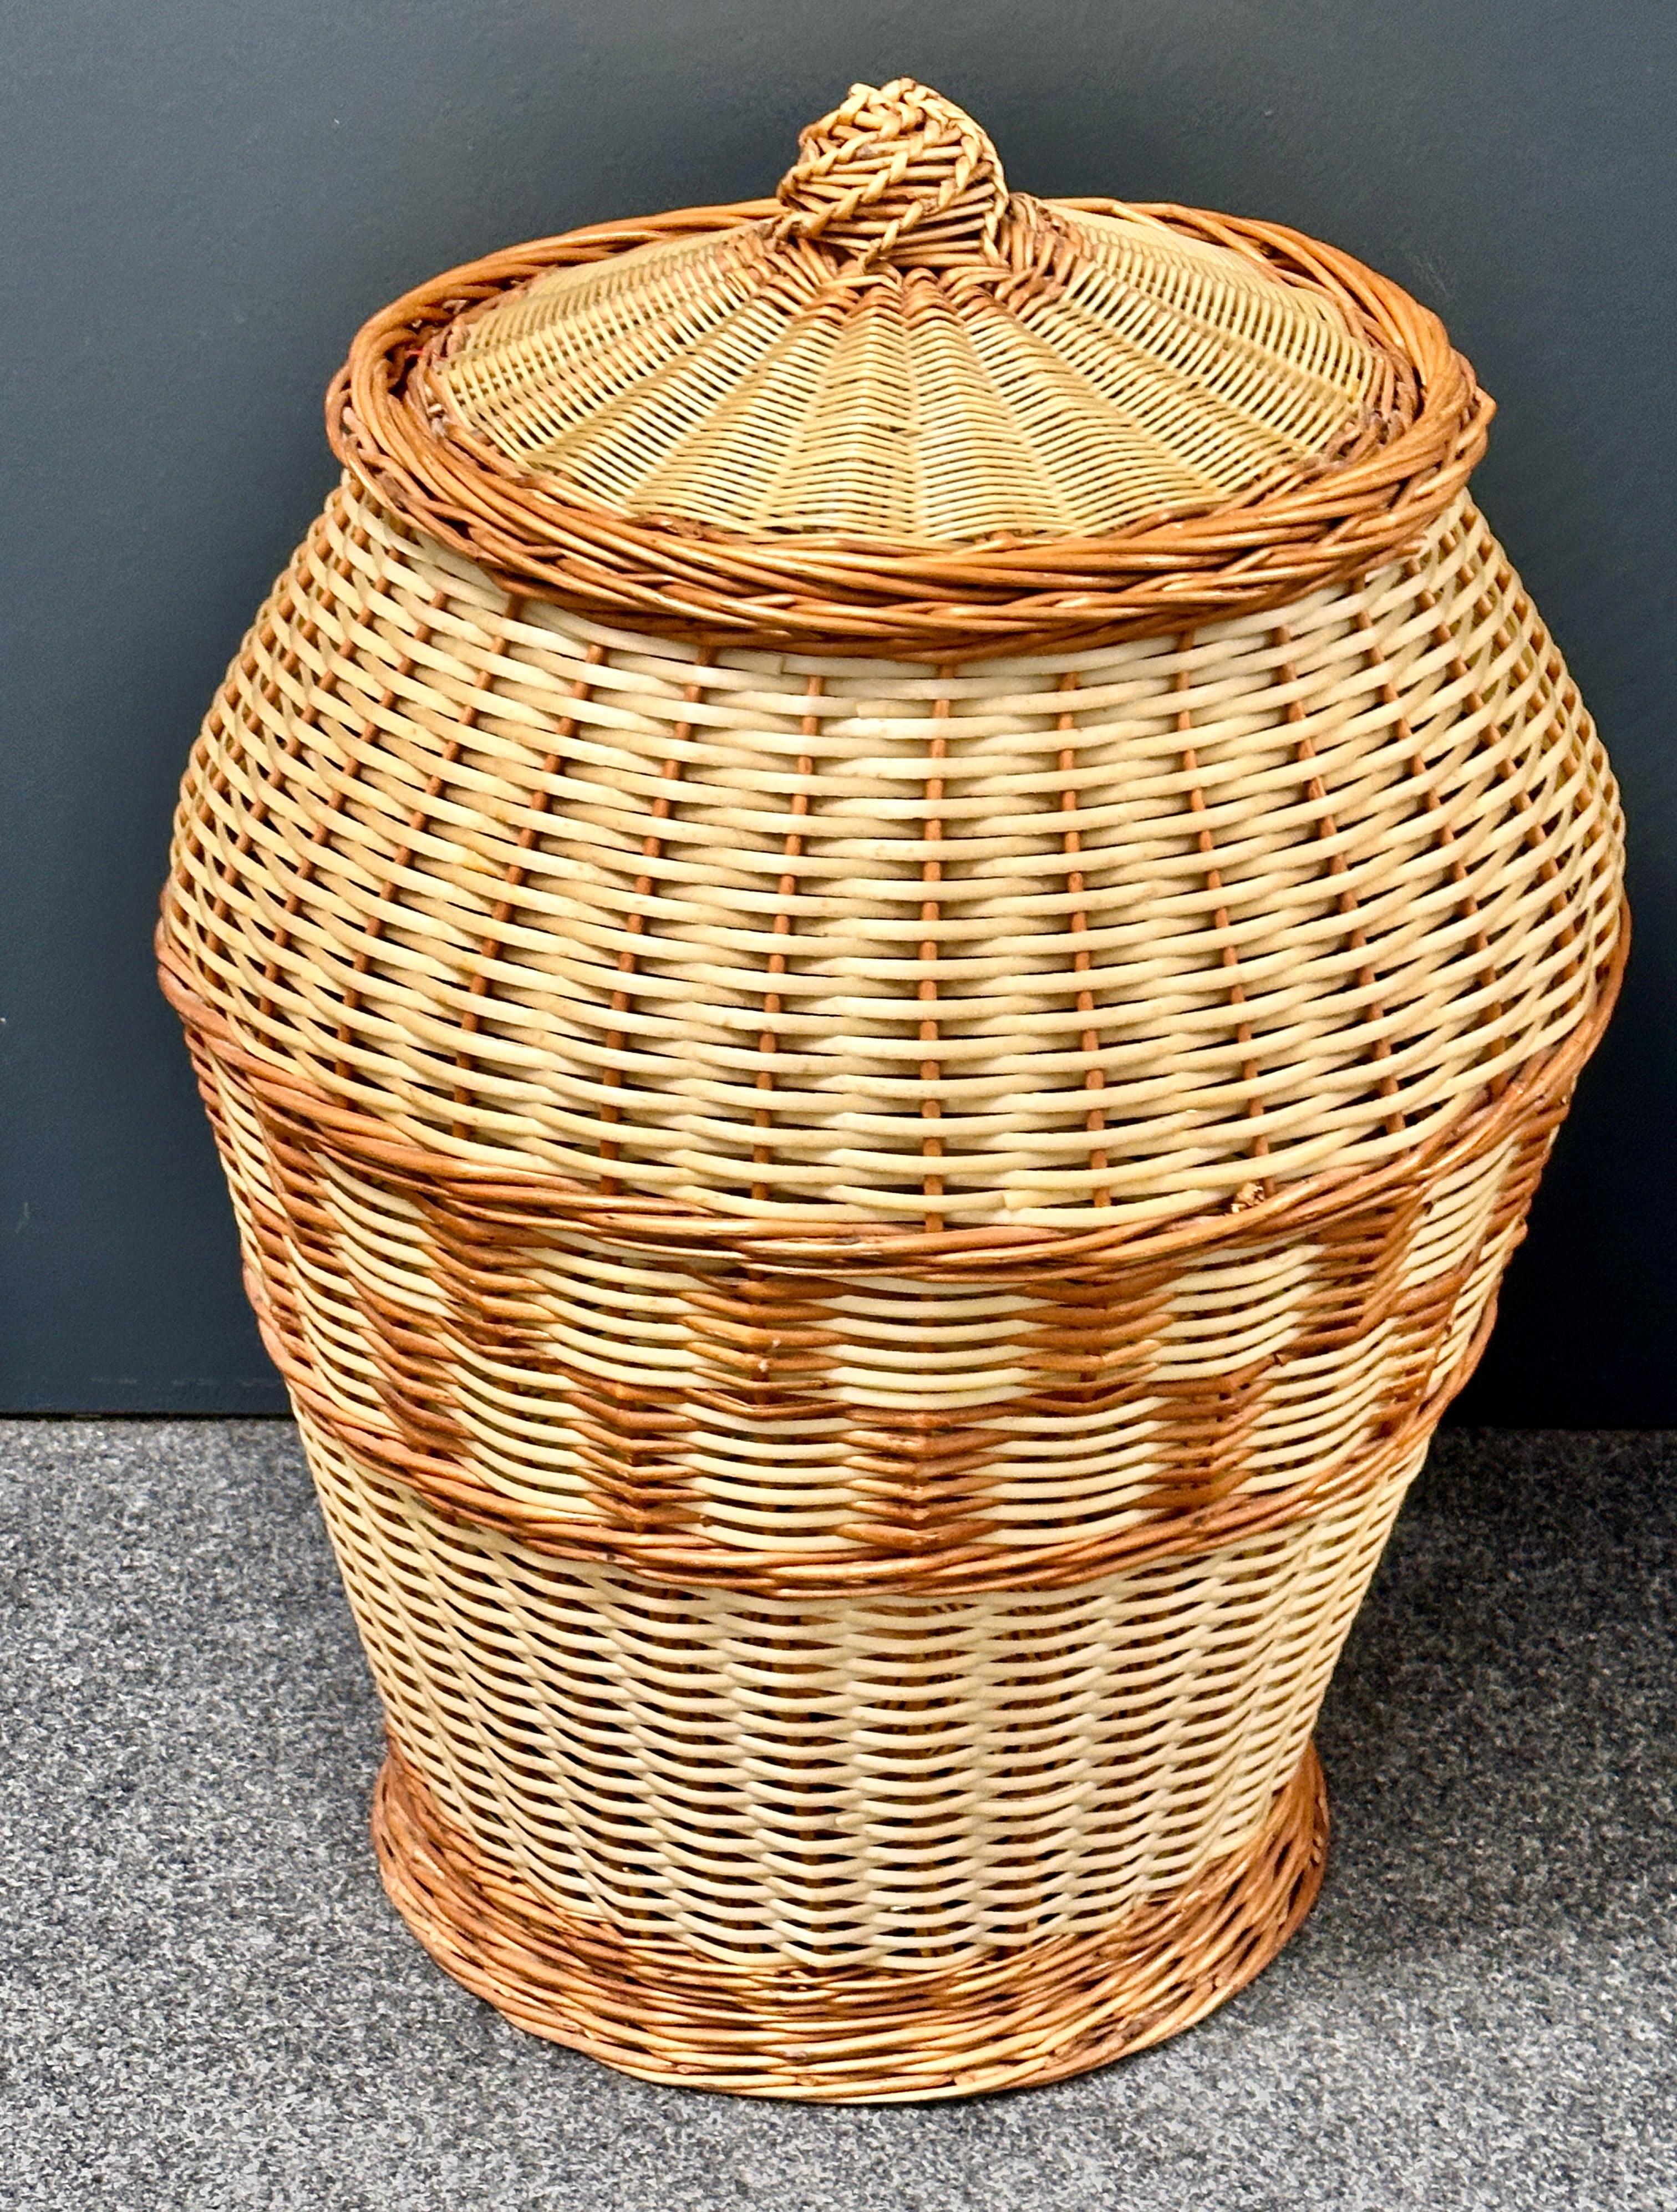 Late 20th Century Stunning Large Vintage Midcentury Wicker Laundry Basket Hamper, 1970s, Italy For Sale